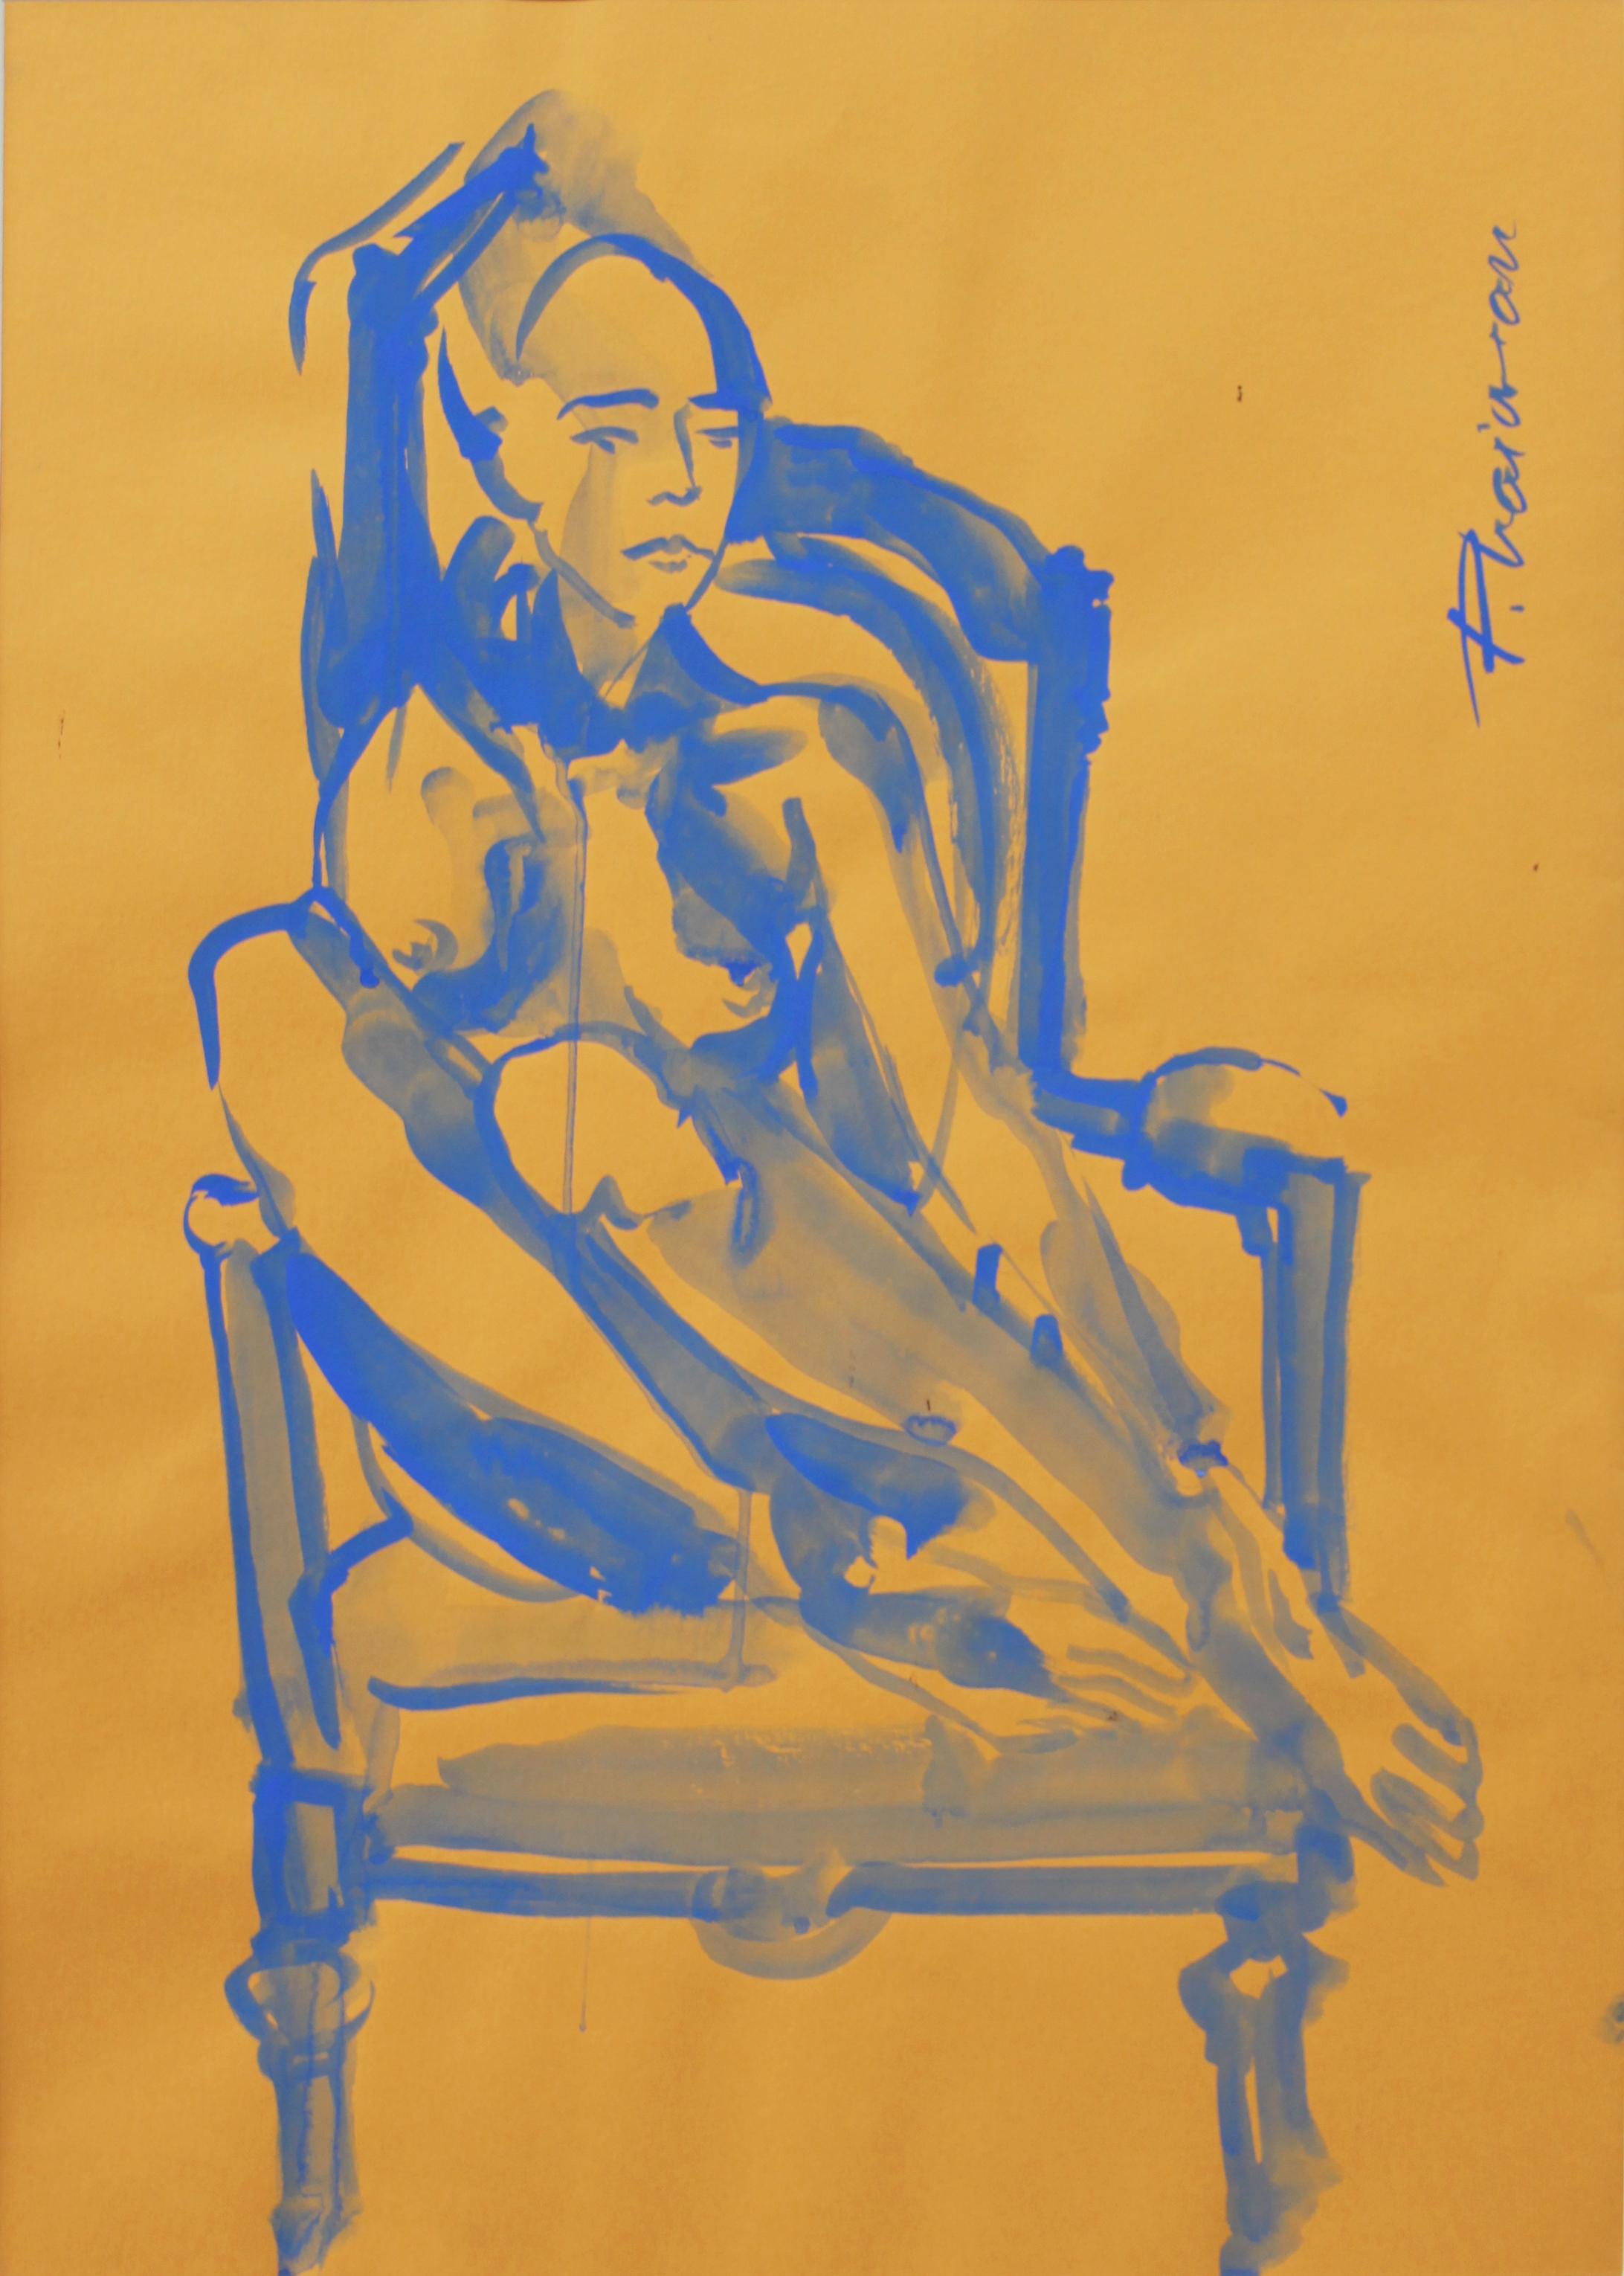 Seating on Armchair 1, nude, pencil and tempera on paper, inspired by Matisse.
Part of Nude in Interior series.
Shipped rolled in a tube, directly from the artist's studio.
In mat and framed as they were in the February exhibition, for display